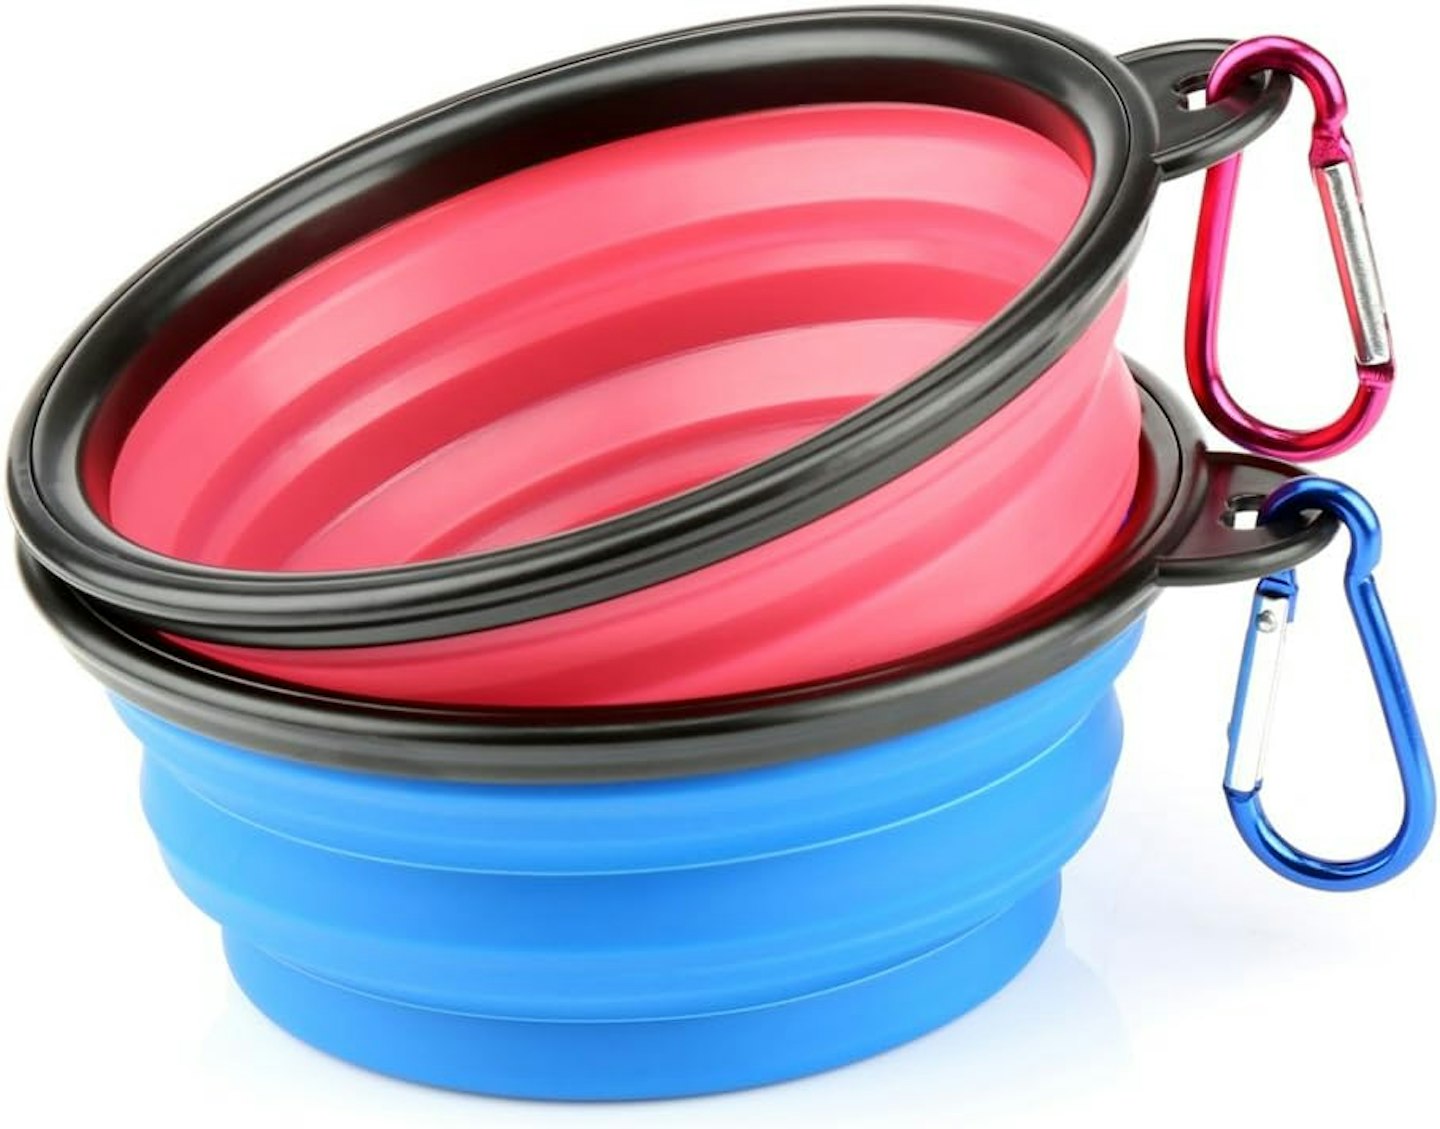 collapsible dog bowls